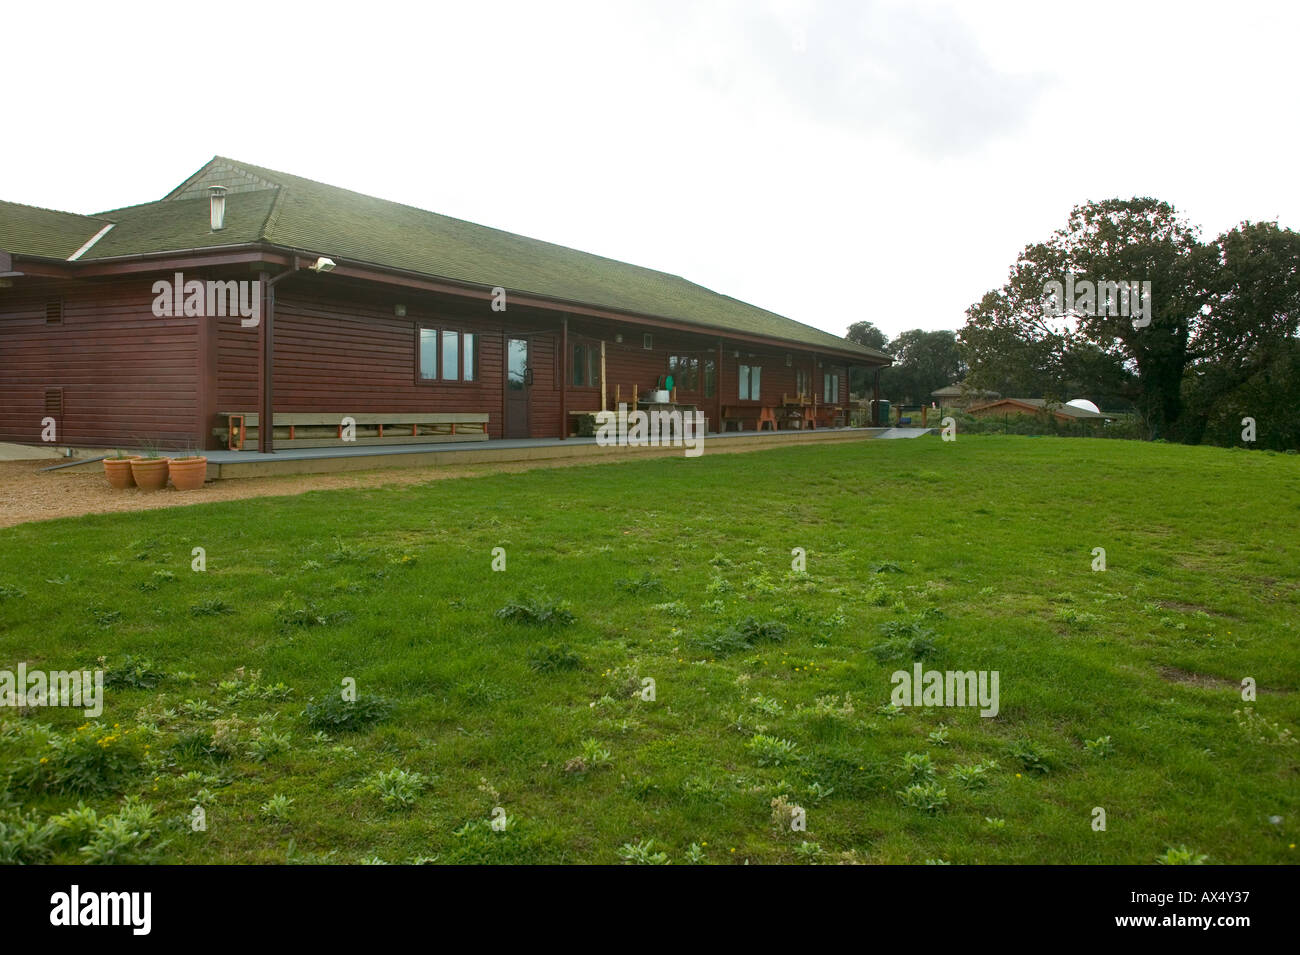 Scouts association building at Le Creux Country Park St Brelades Jersey  Stock Photo - Alamy